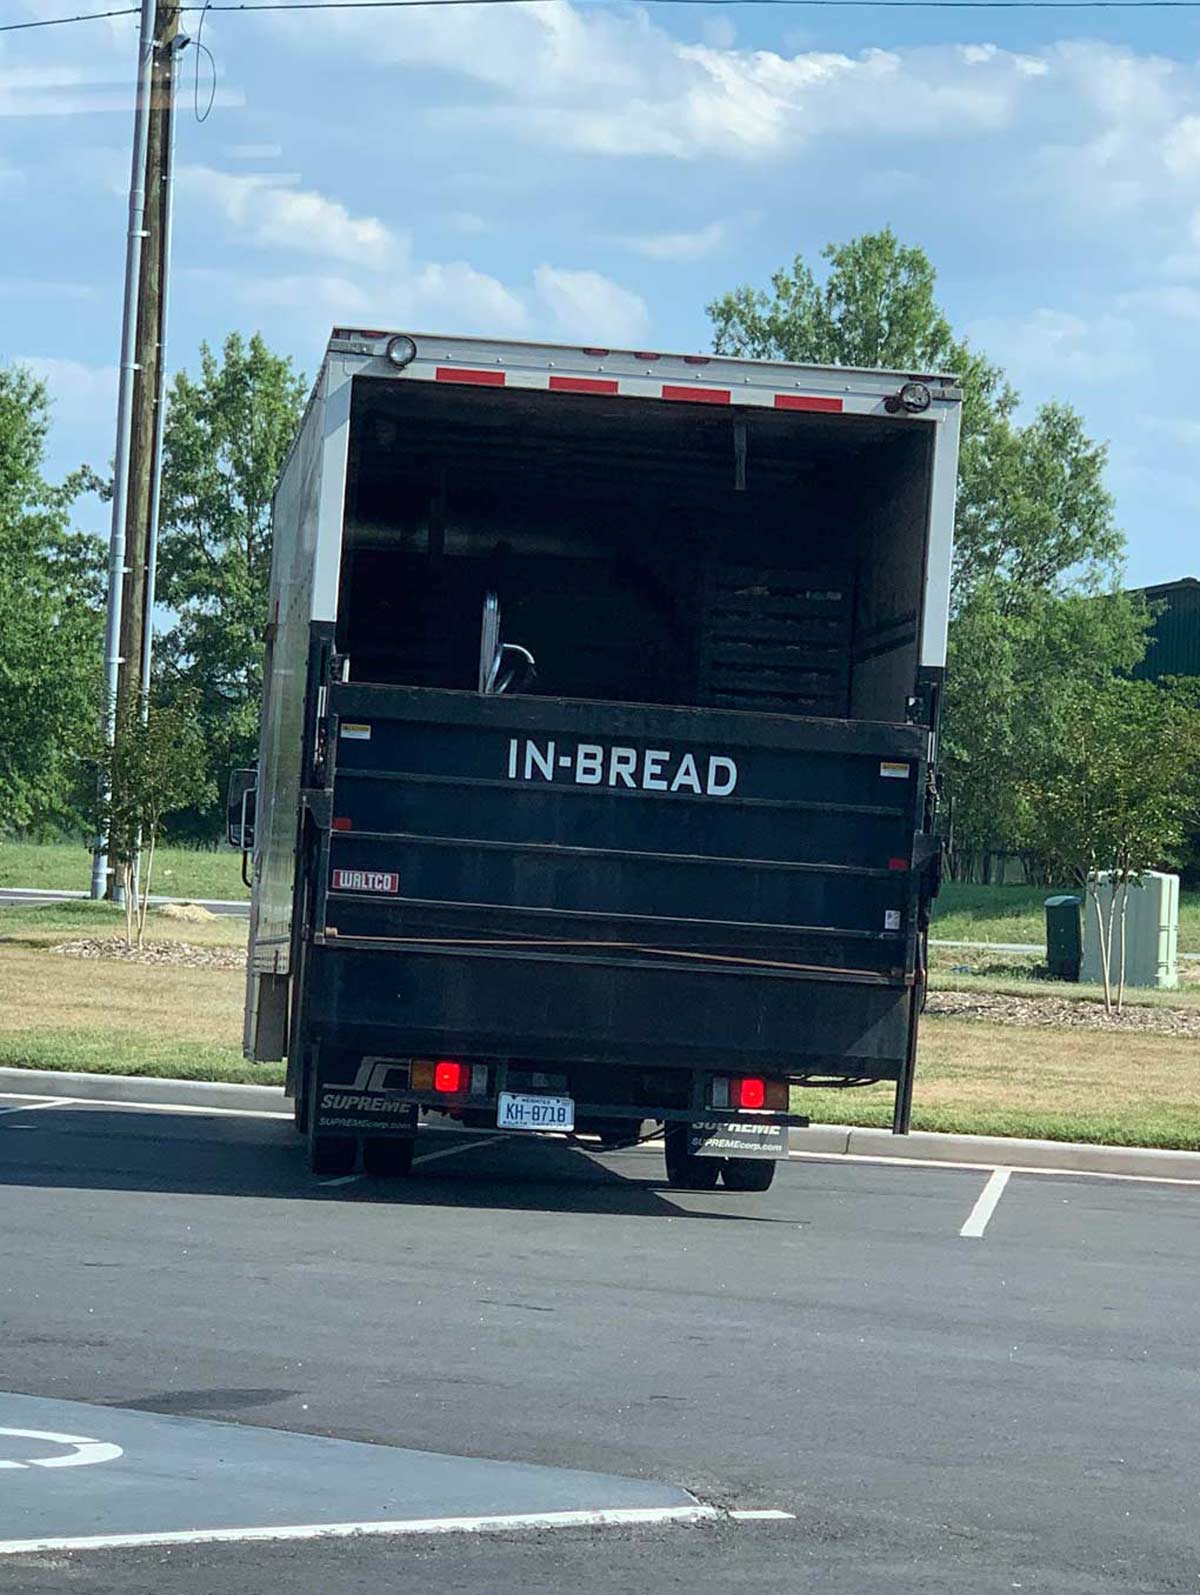 Our local family-owned bakery delivery service